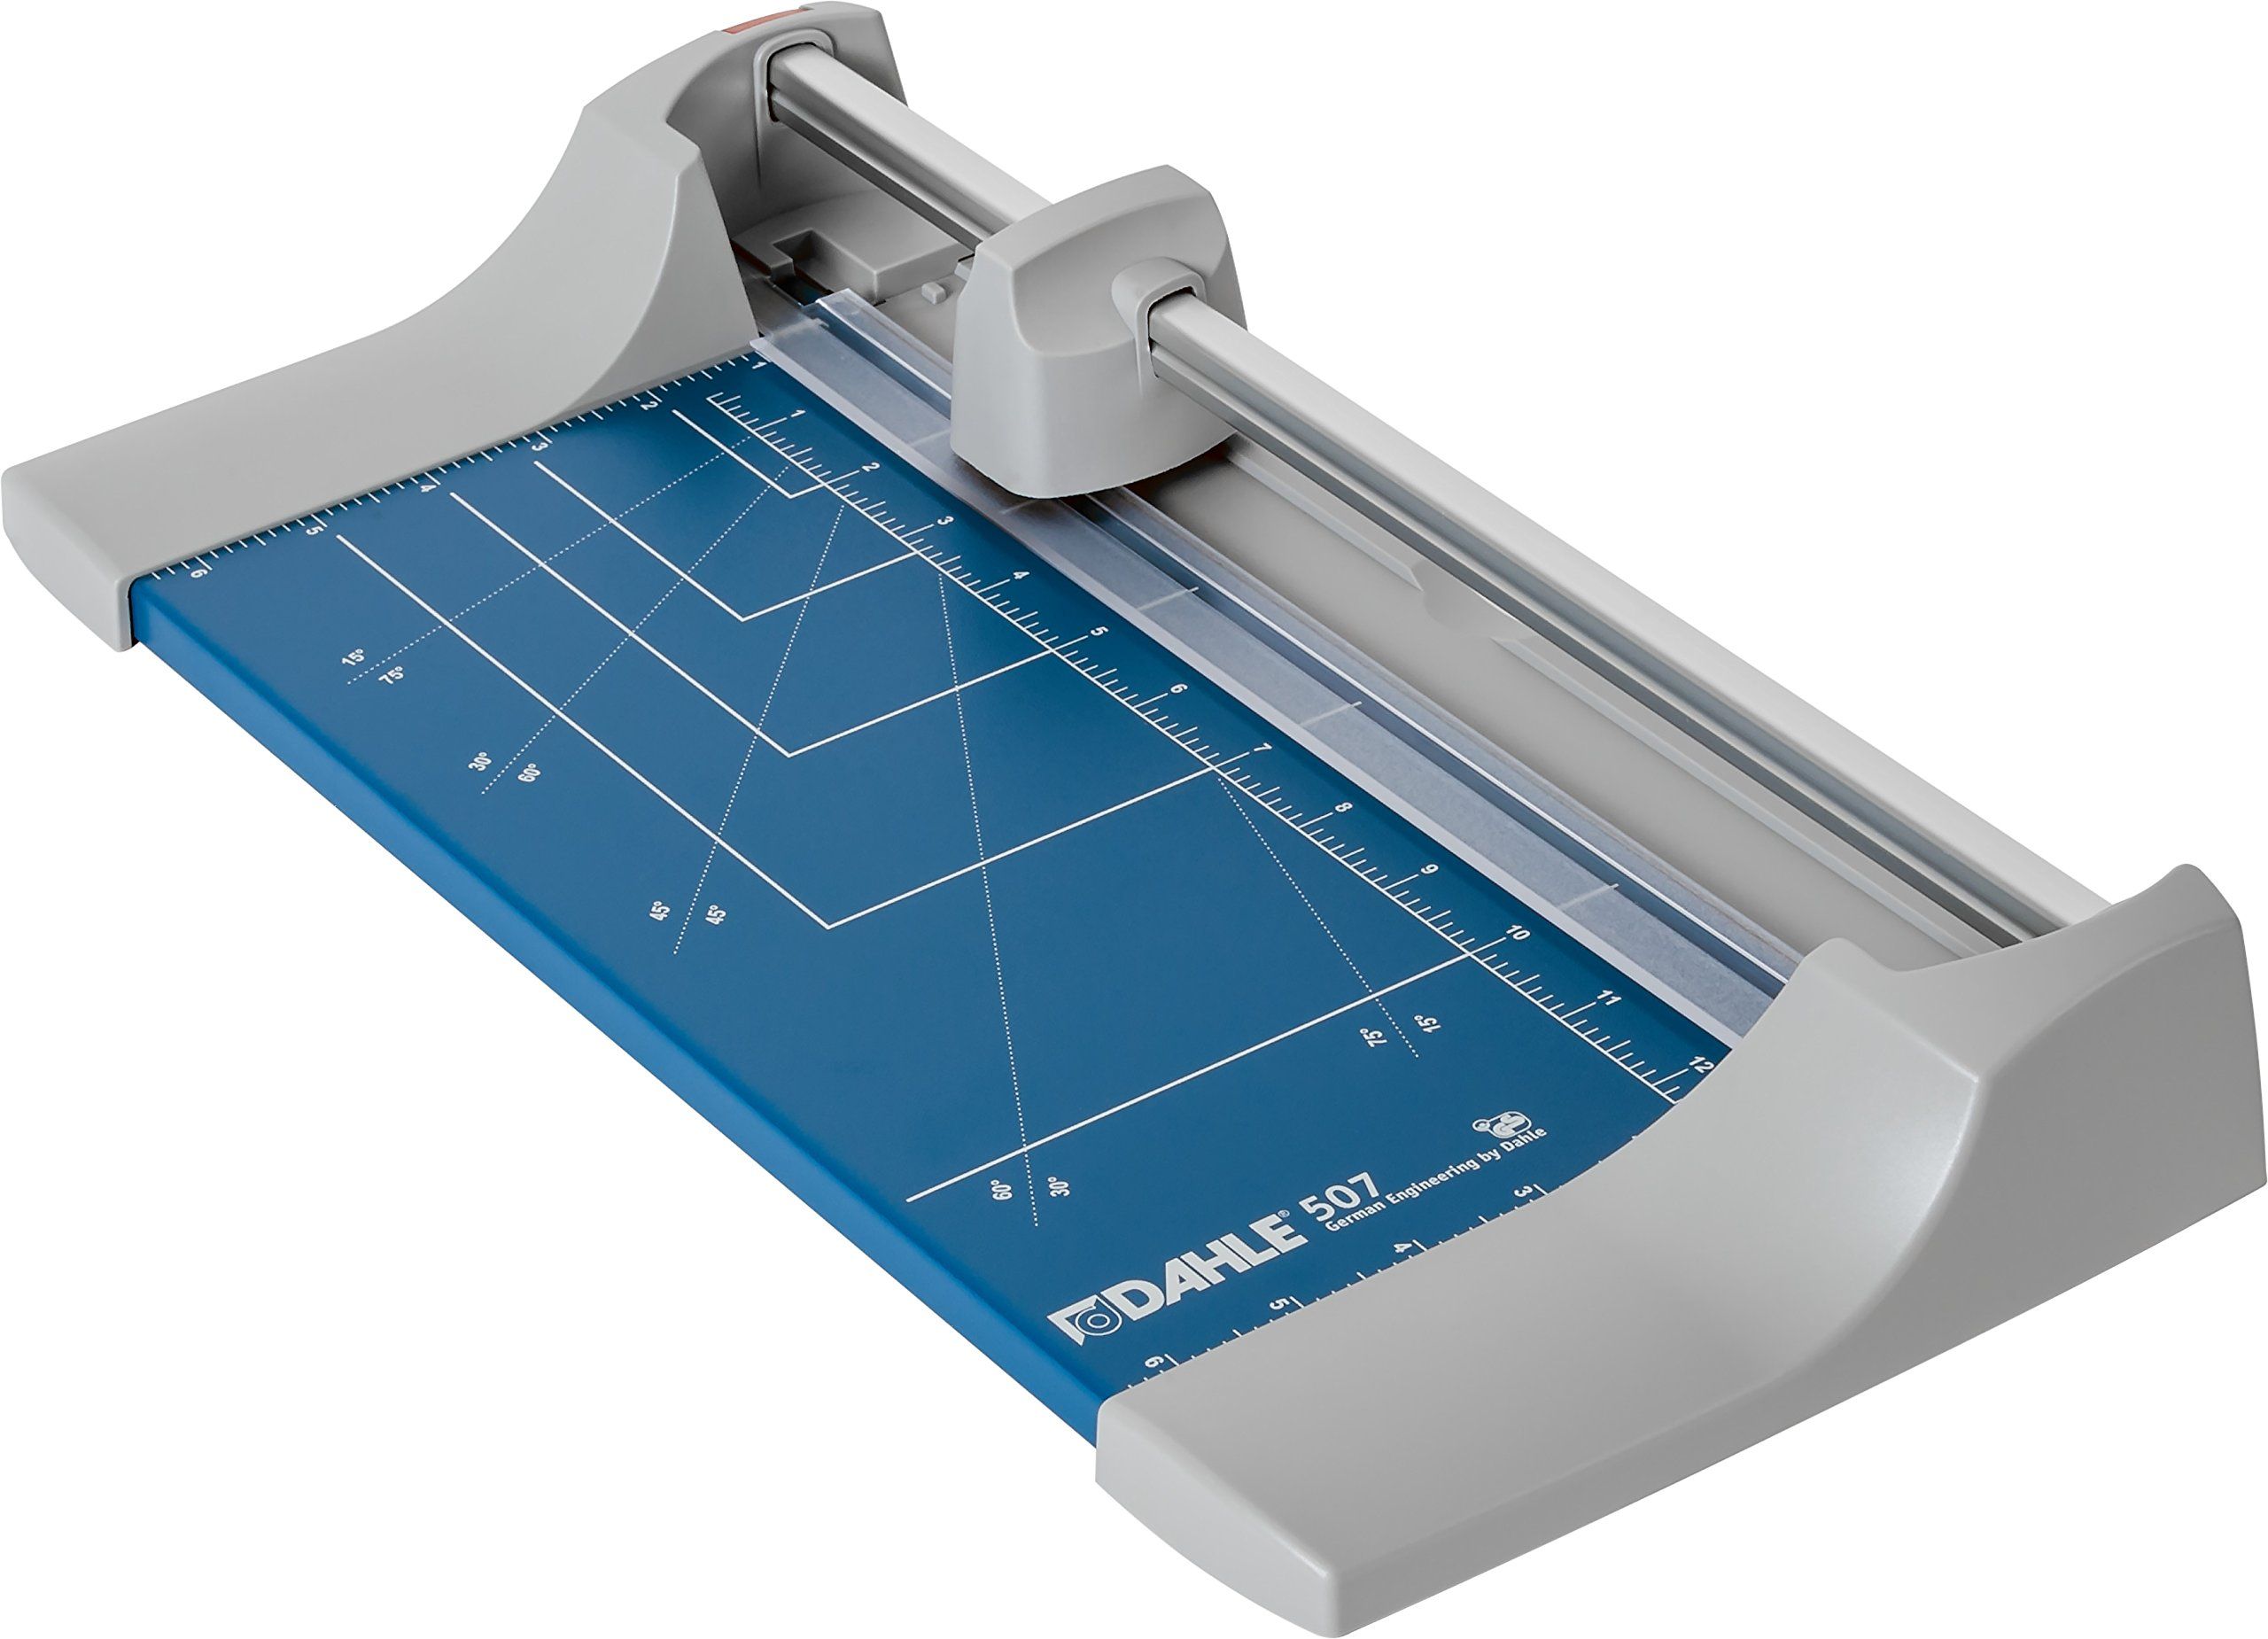 Dahle 507 Personal Rotary Trimmer, 12" Cut Length, 7 Sheet Capacity, Self-Sharpening, Automatic Clamp, German Engineered Paper Cutter | Amazon (US)